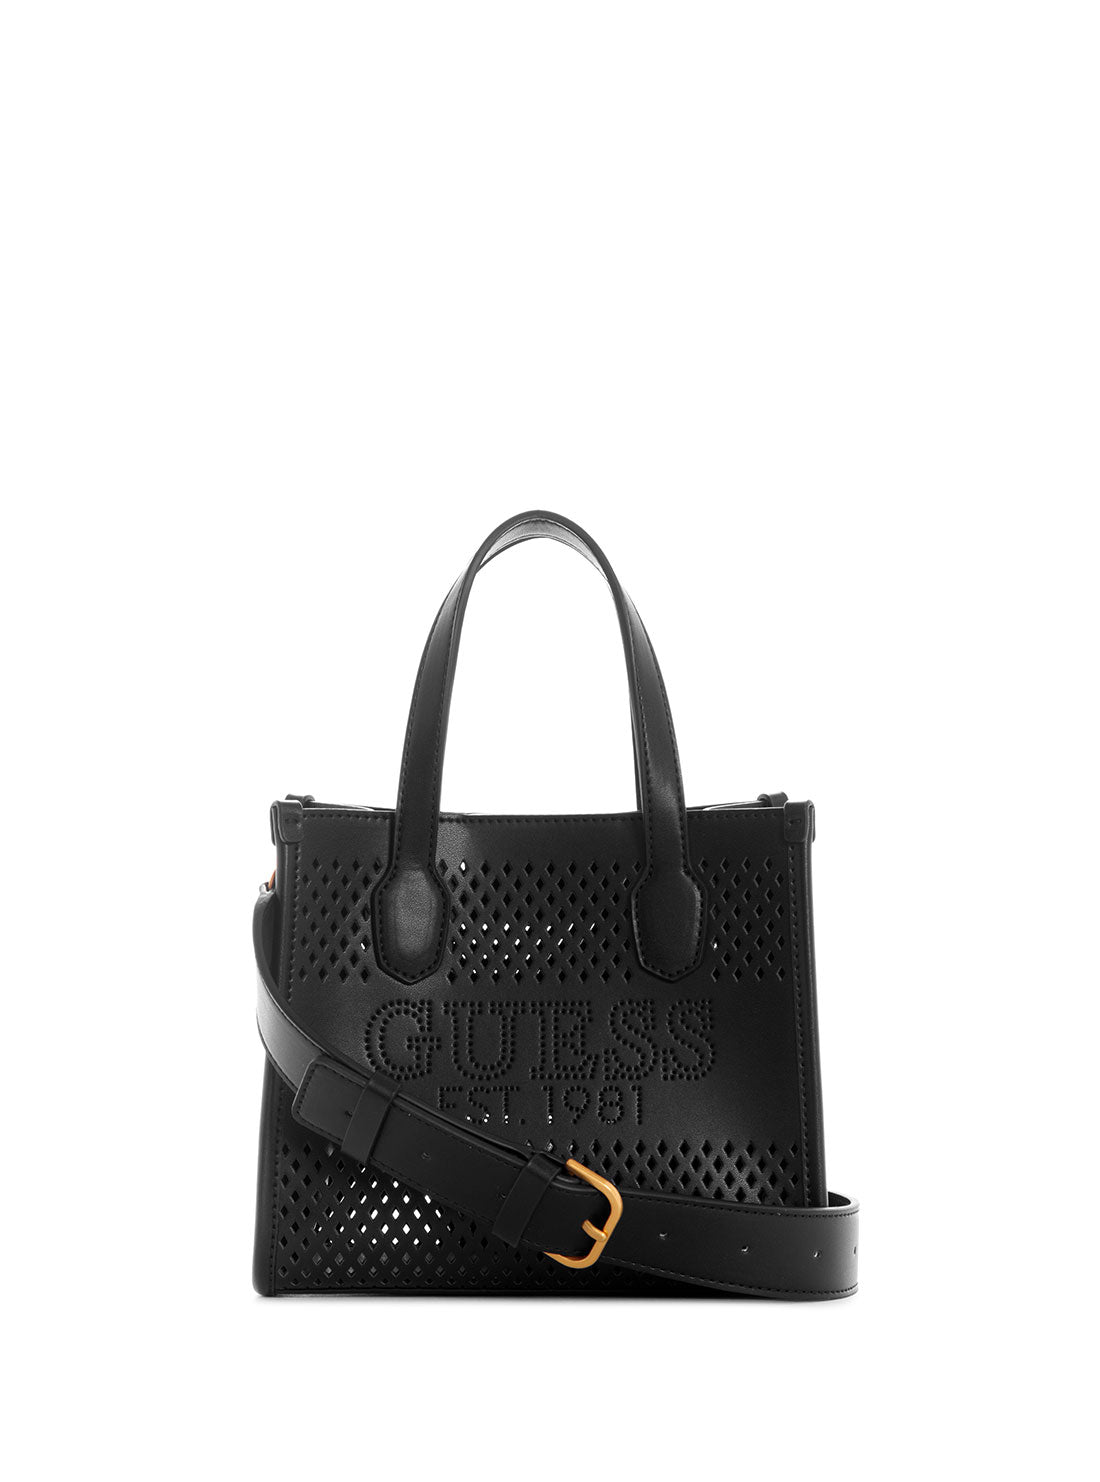 GUESS Women's Black Katey Perf Mini Tote Bag WH876976 Front View